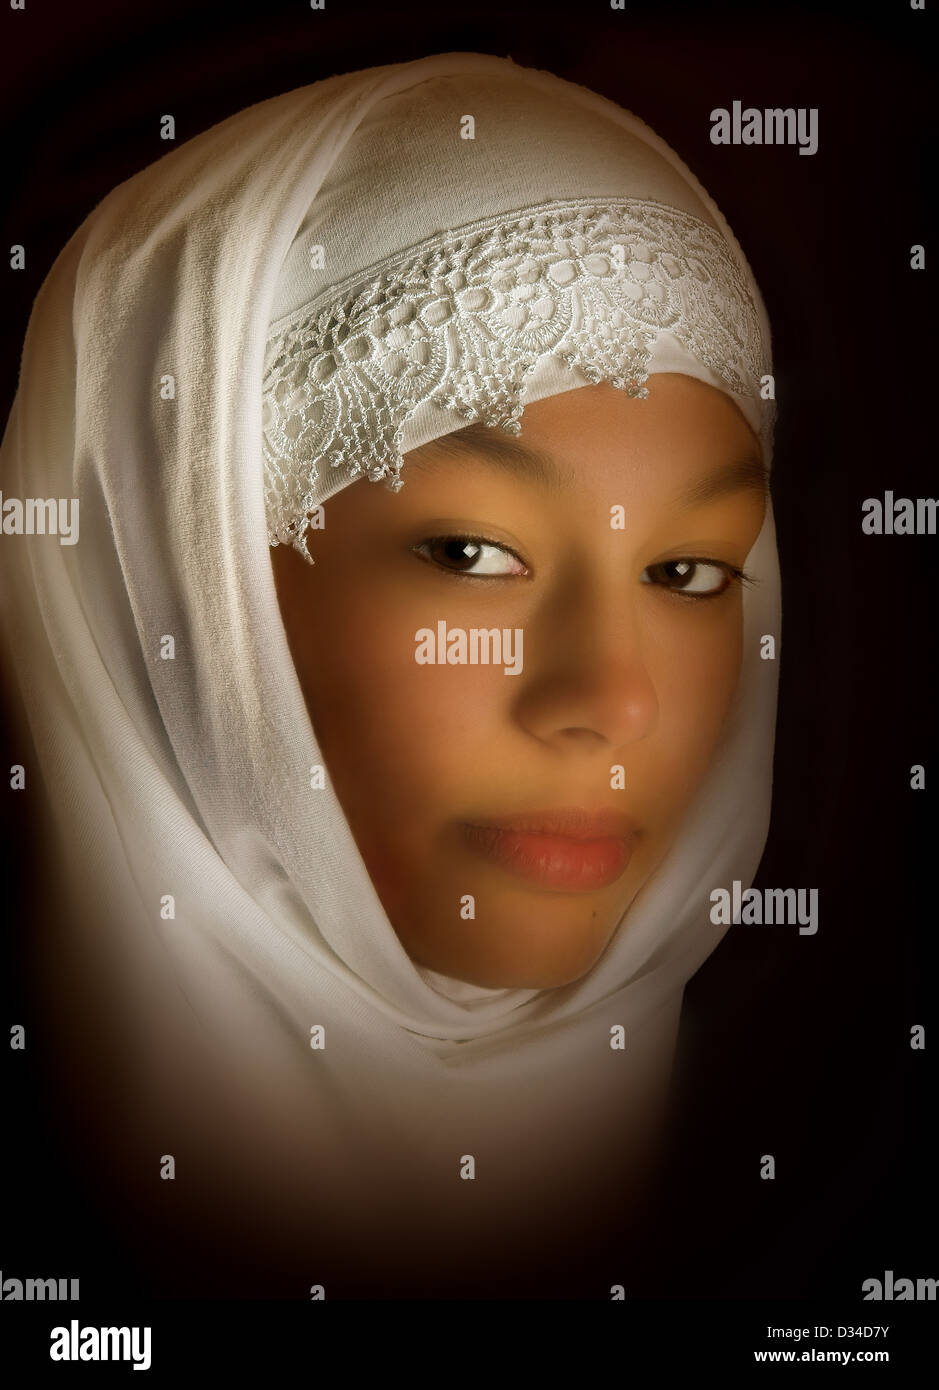 https://c8.alamy.com/comp/D34D7Y/young-muslim-woman-with-white-veil-against-a-dark-background-D34D7Y.jpg